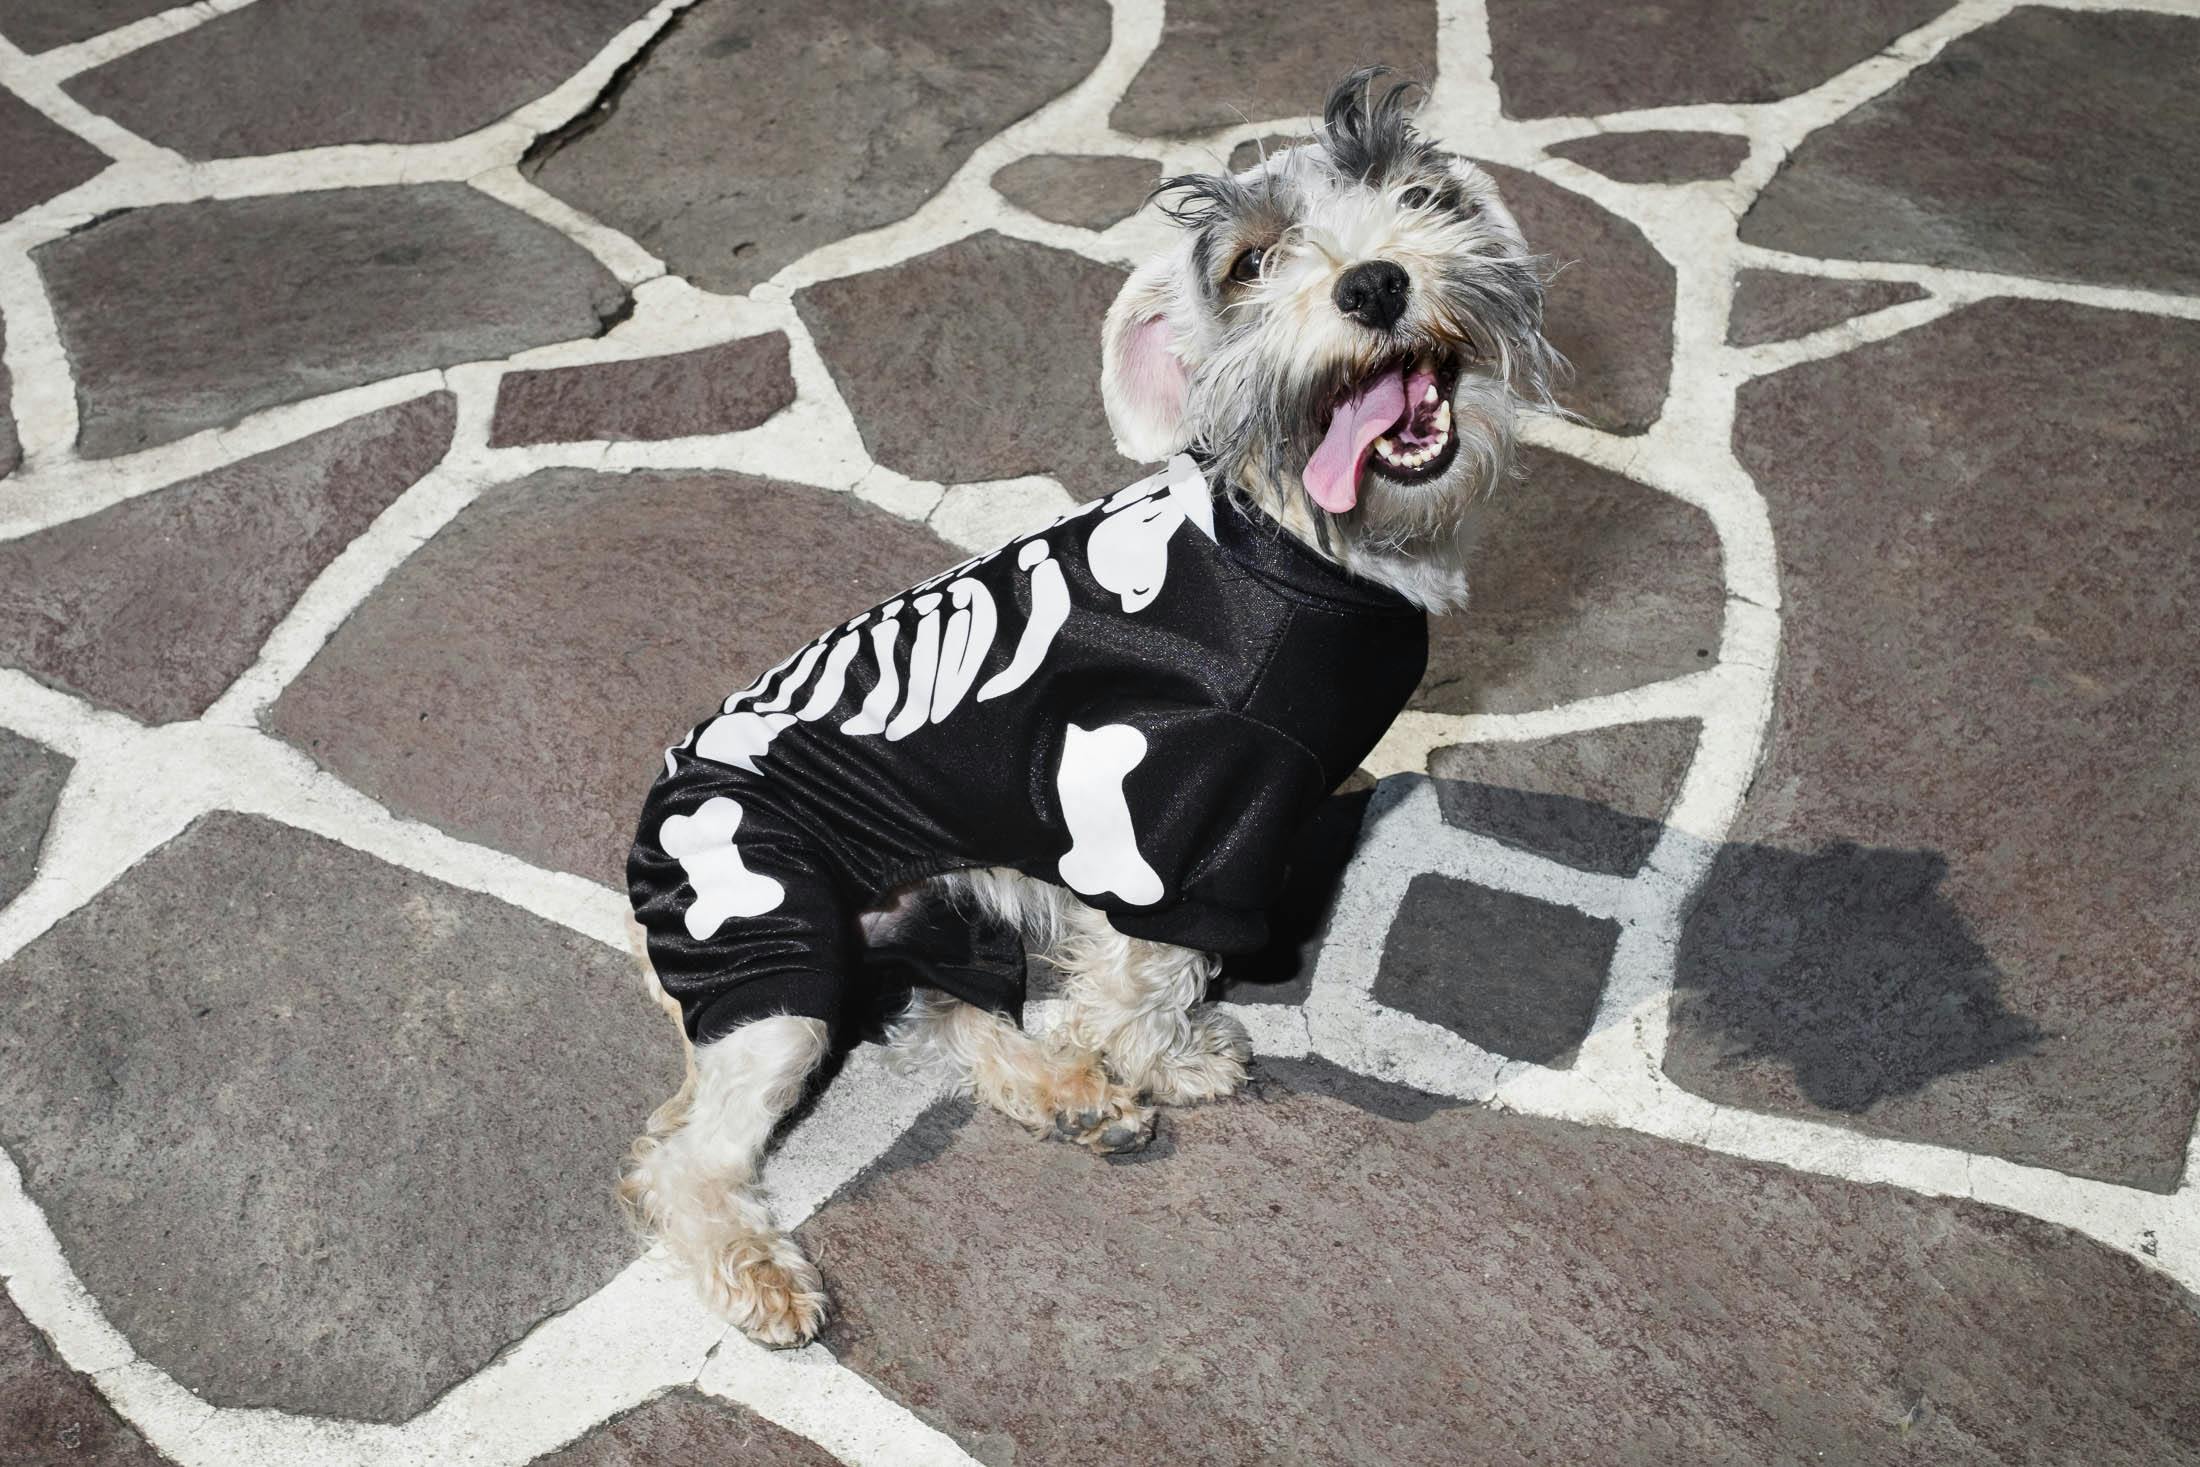 Dog with bones outfit in Mexico